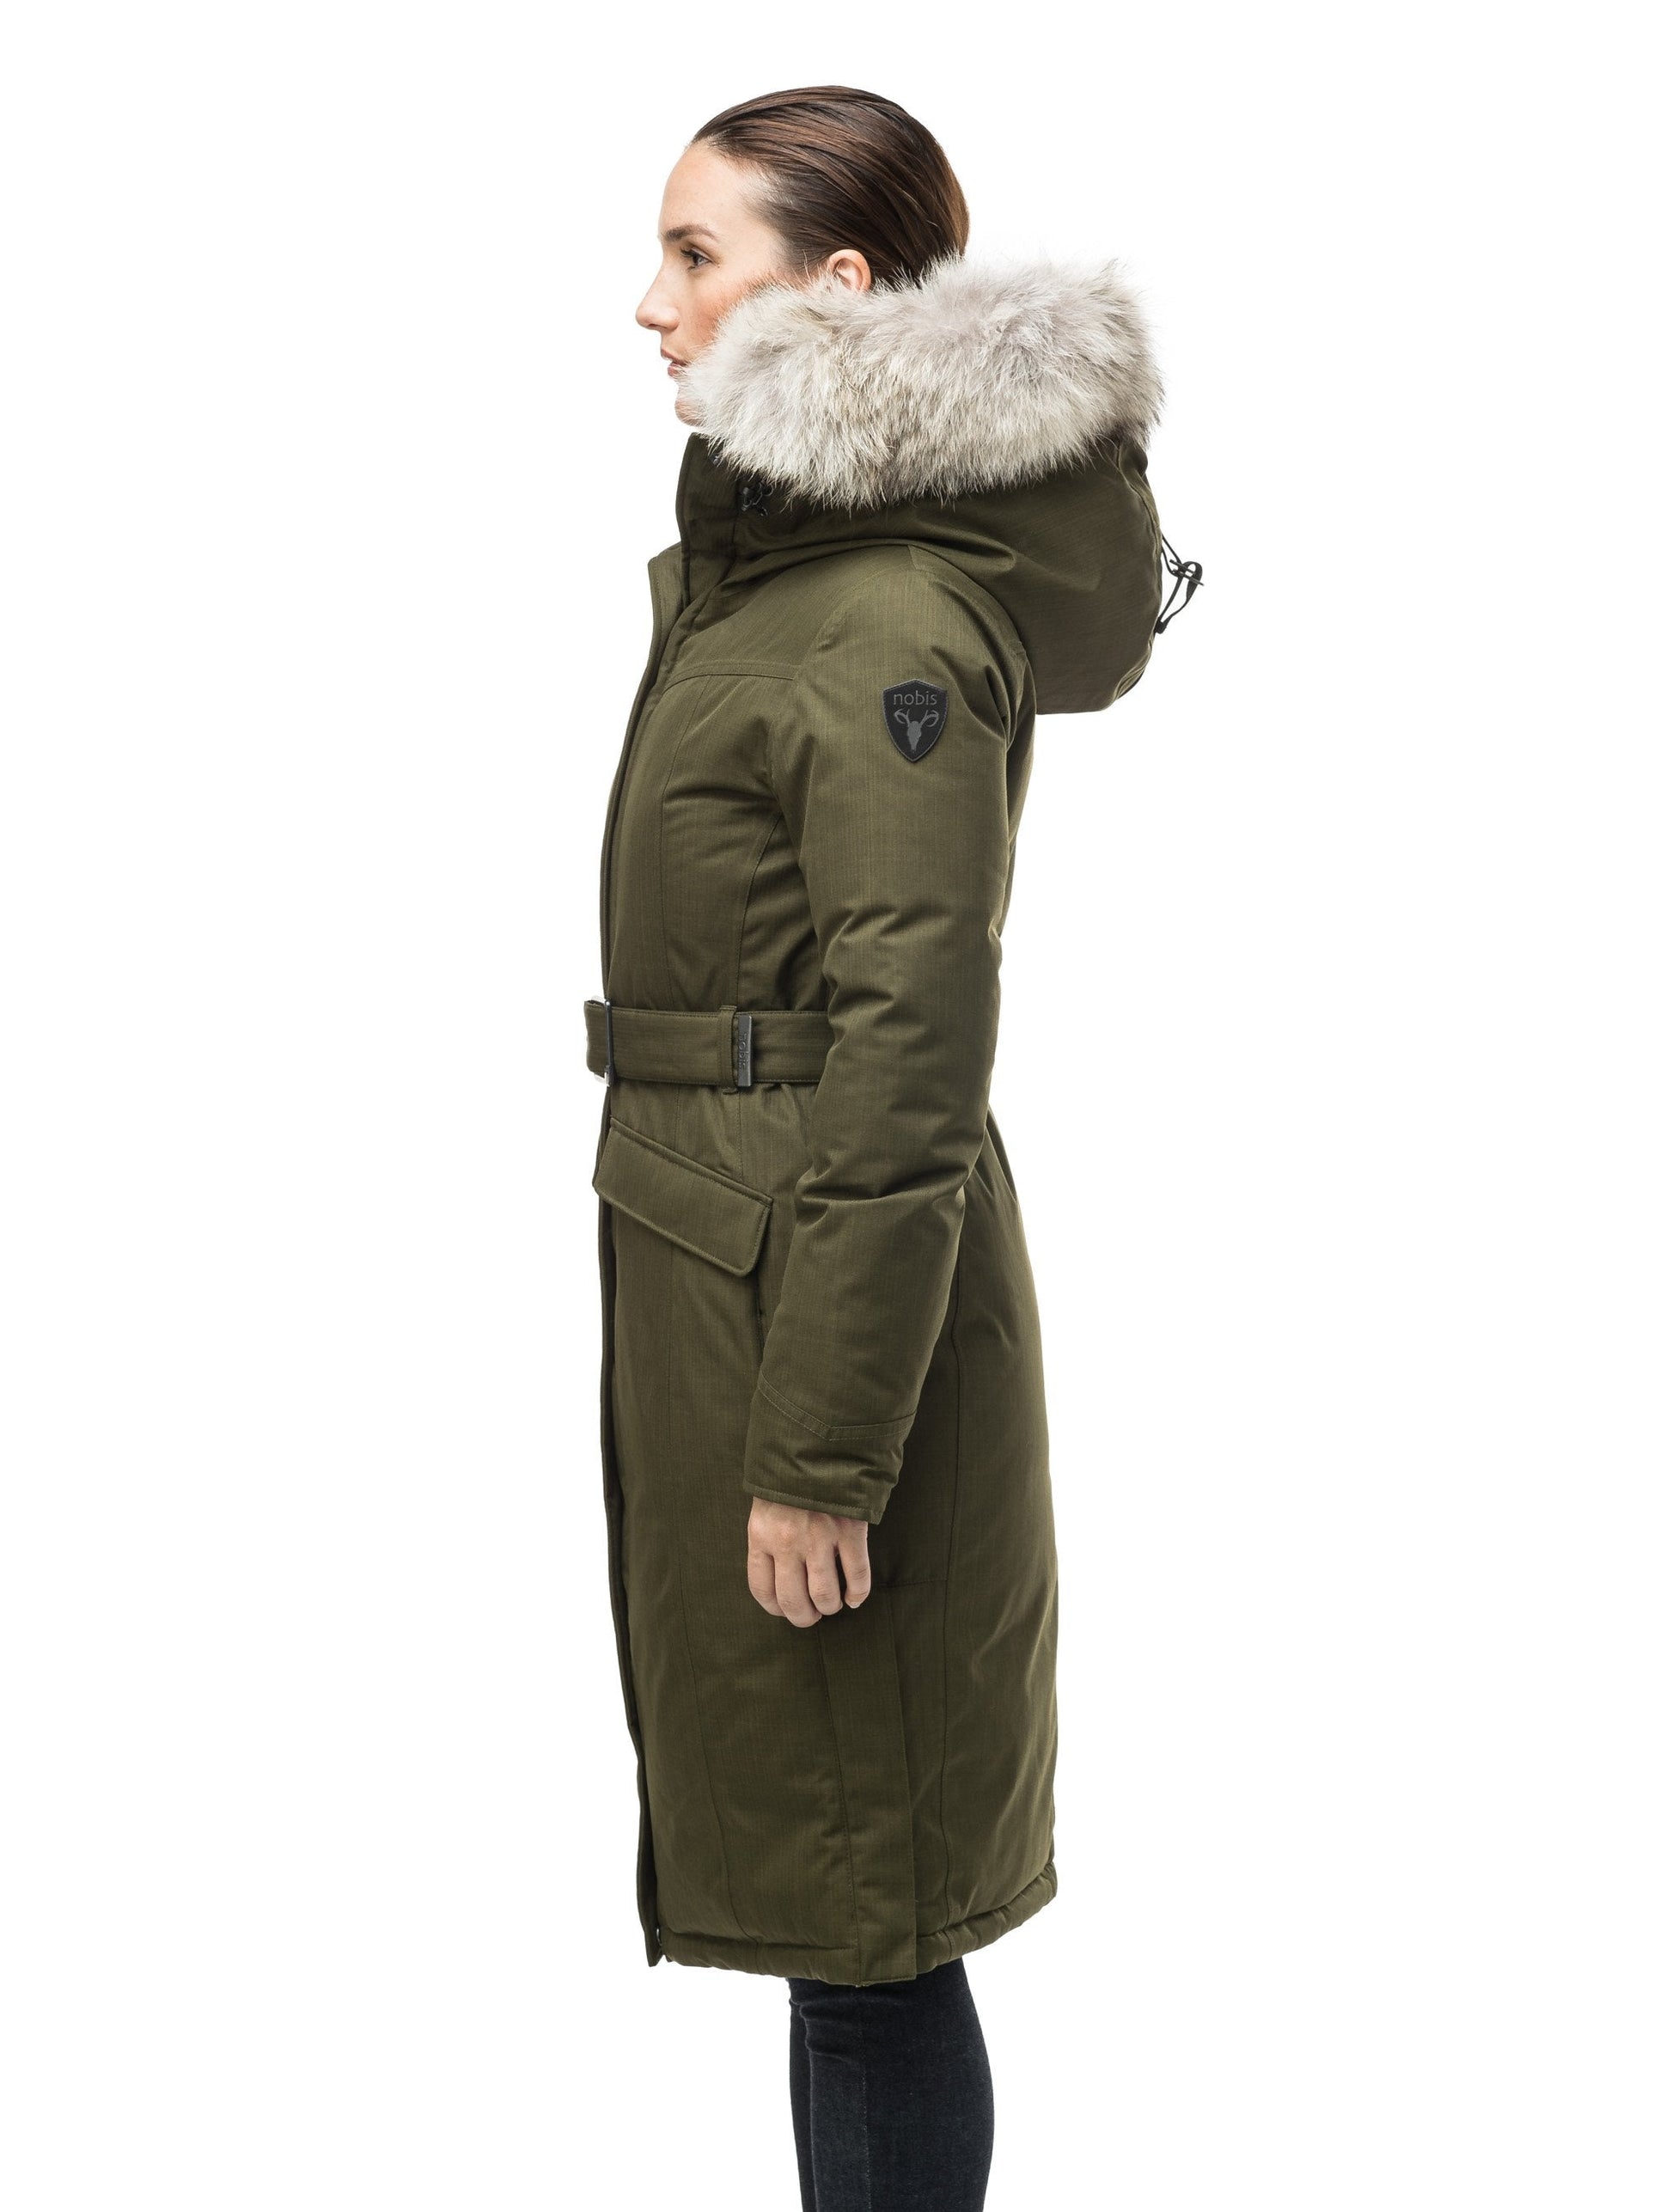 Women's maxi down filled parka with calf length hem in CH Fatigue